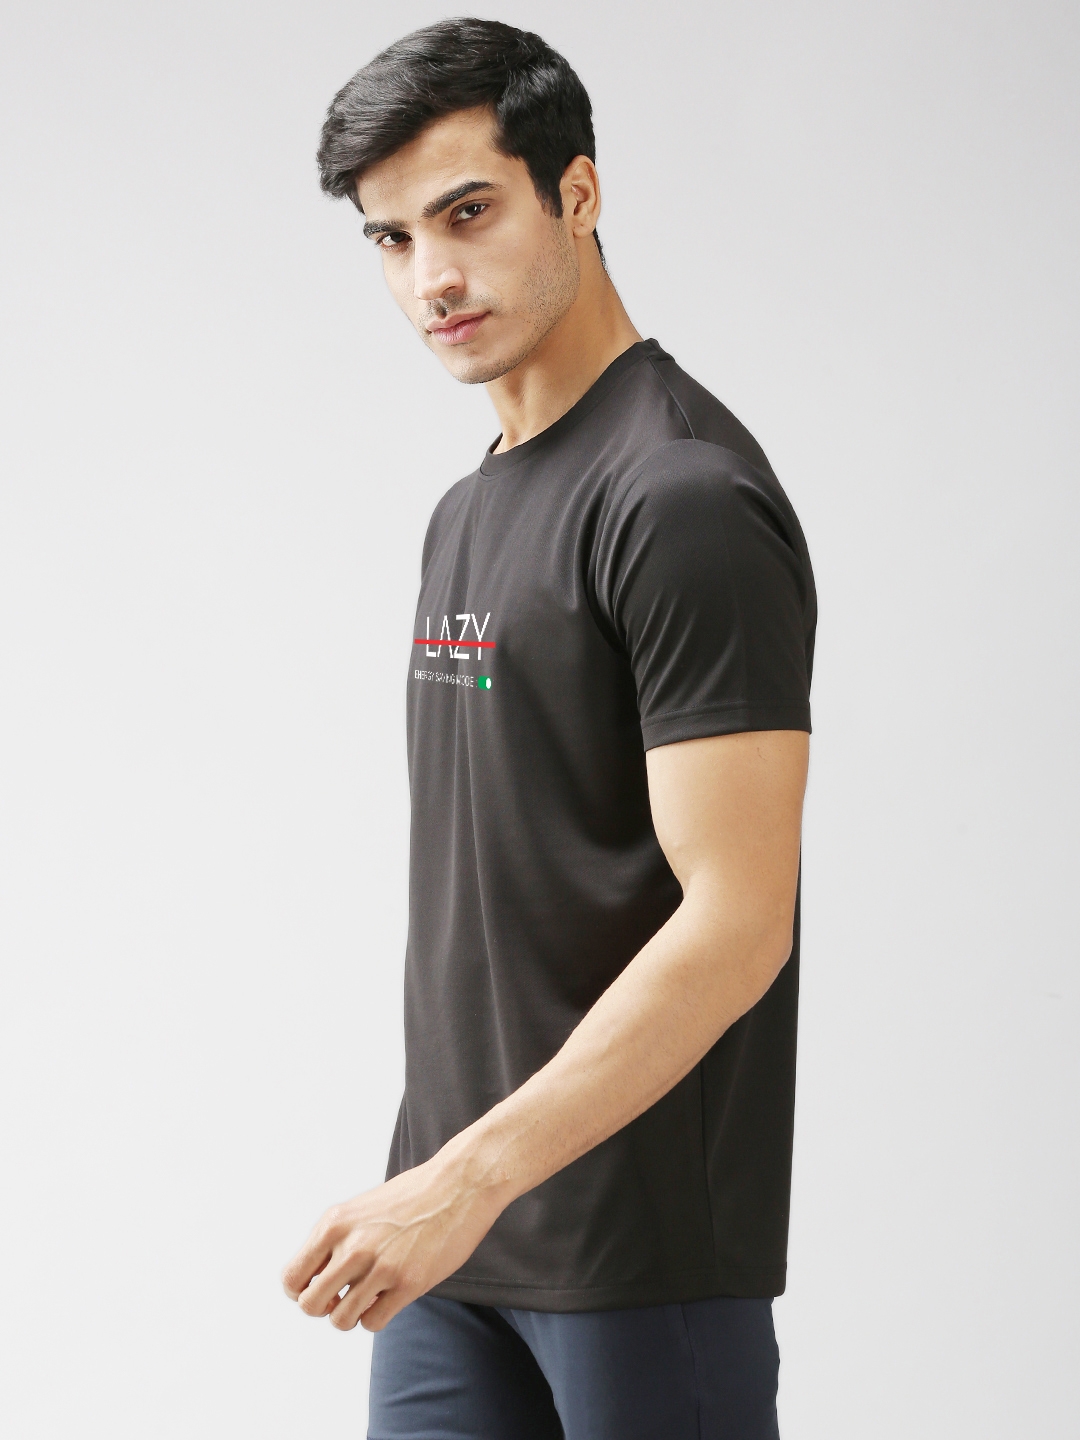 Eppe | EPPE Dryfit Micropolyester Tshirt for Men's Round Neck Half Sleeves Sports Casual - Black - Size-S(36) 2